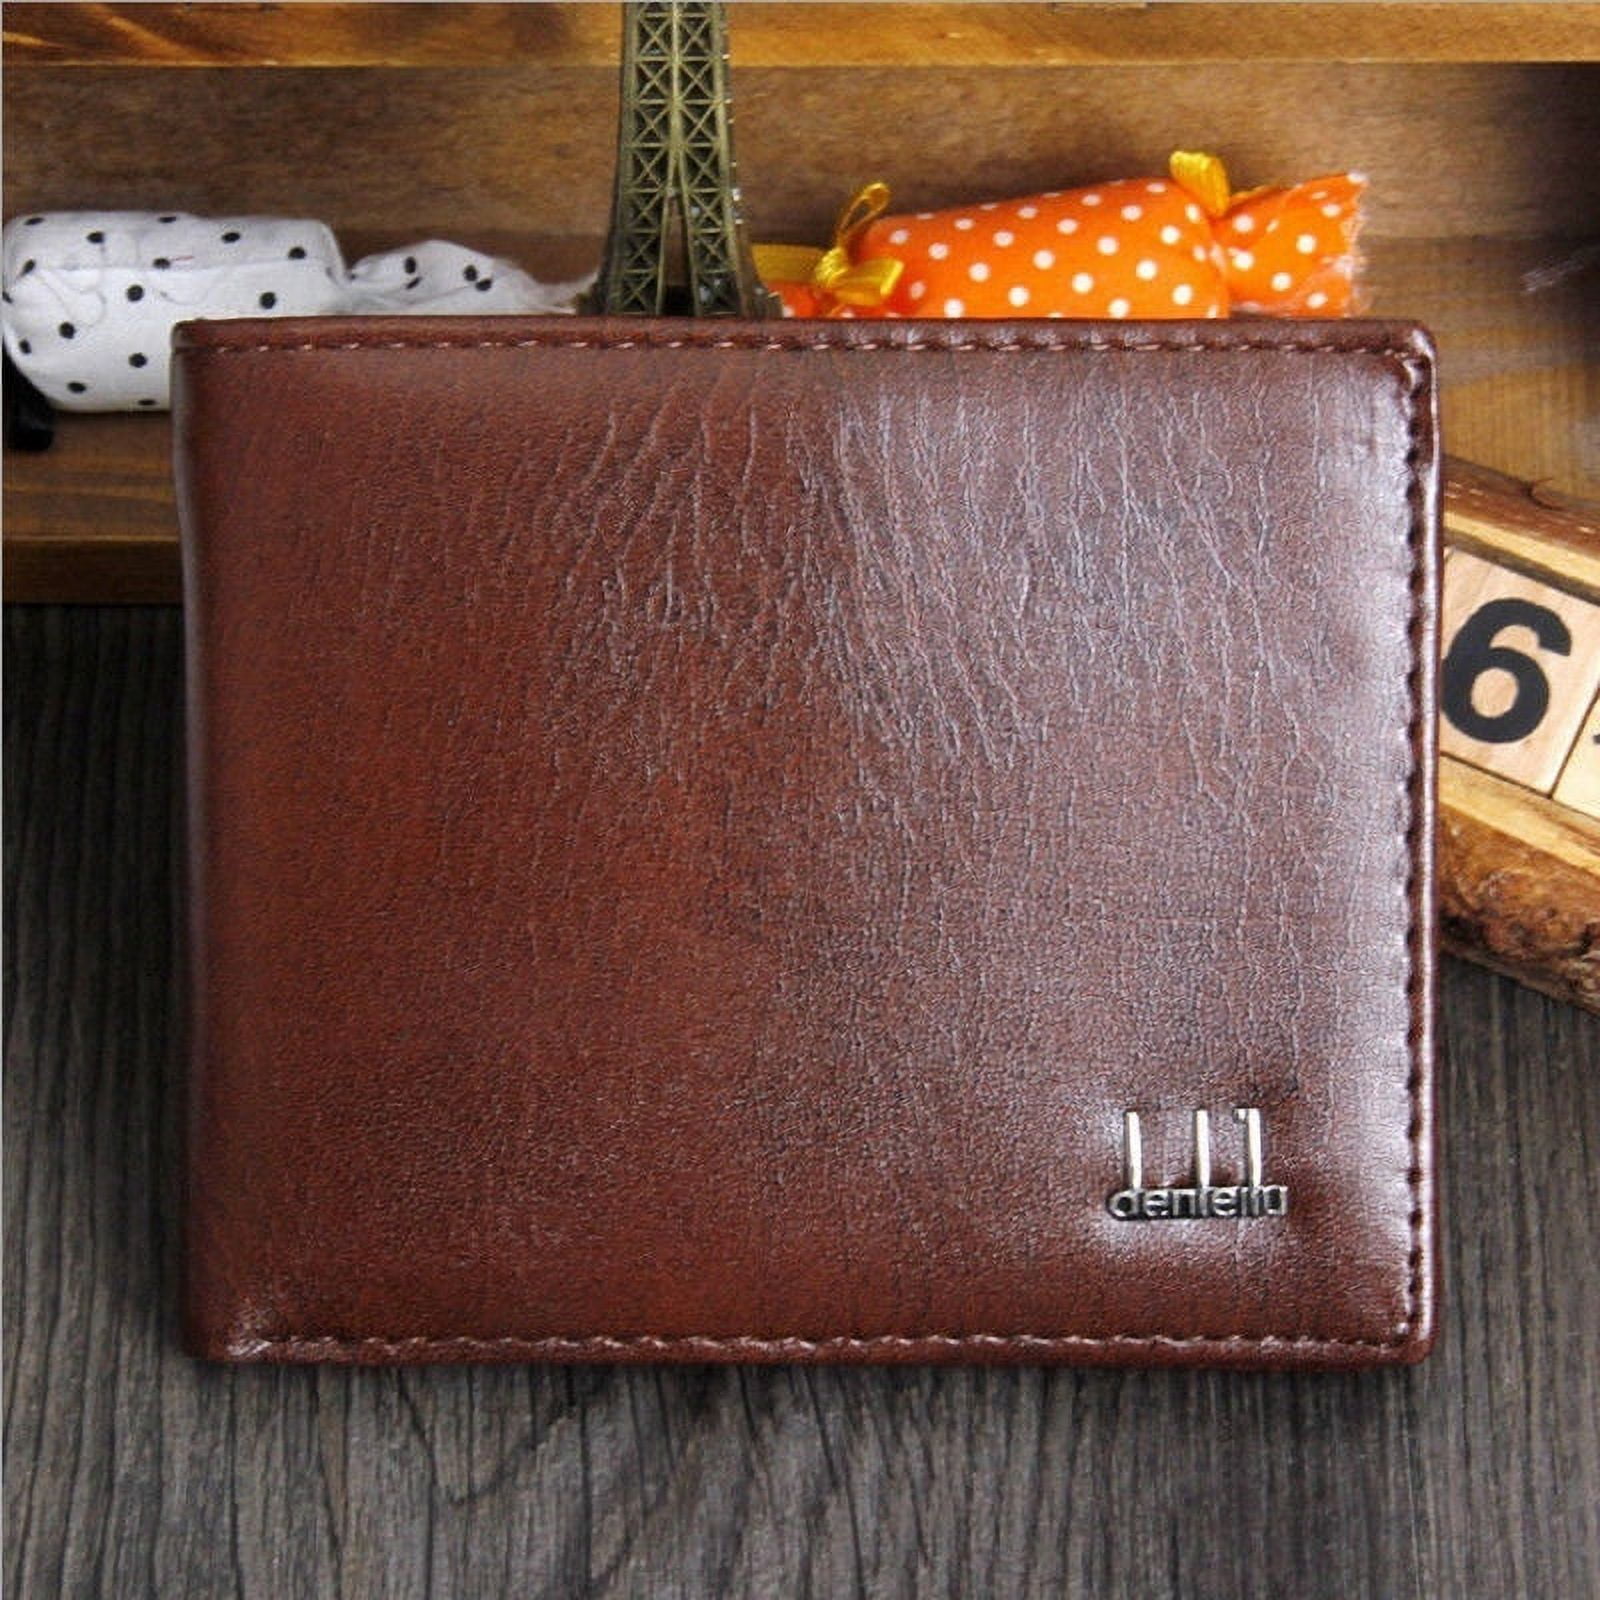 What is Sh2450 Designer Coin Custom Leather Wallets Men Leather